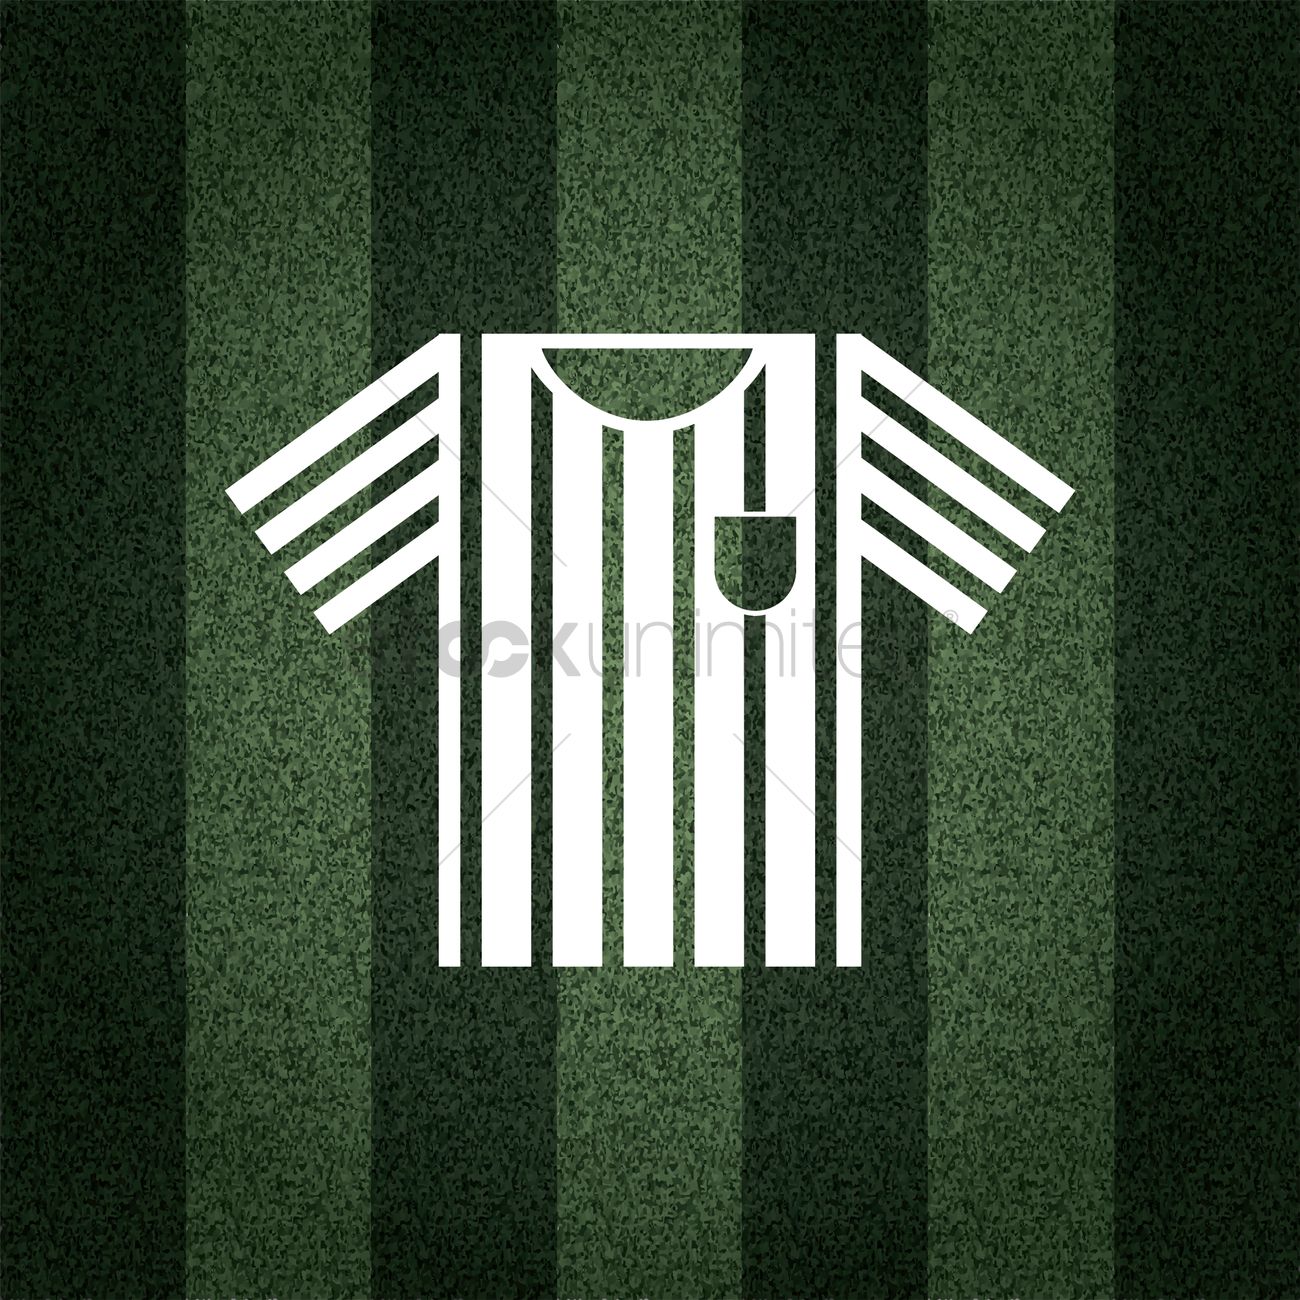 Football Referee T Shirt On Striped Background Vector Image